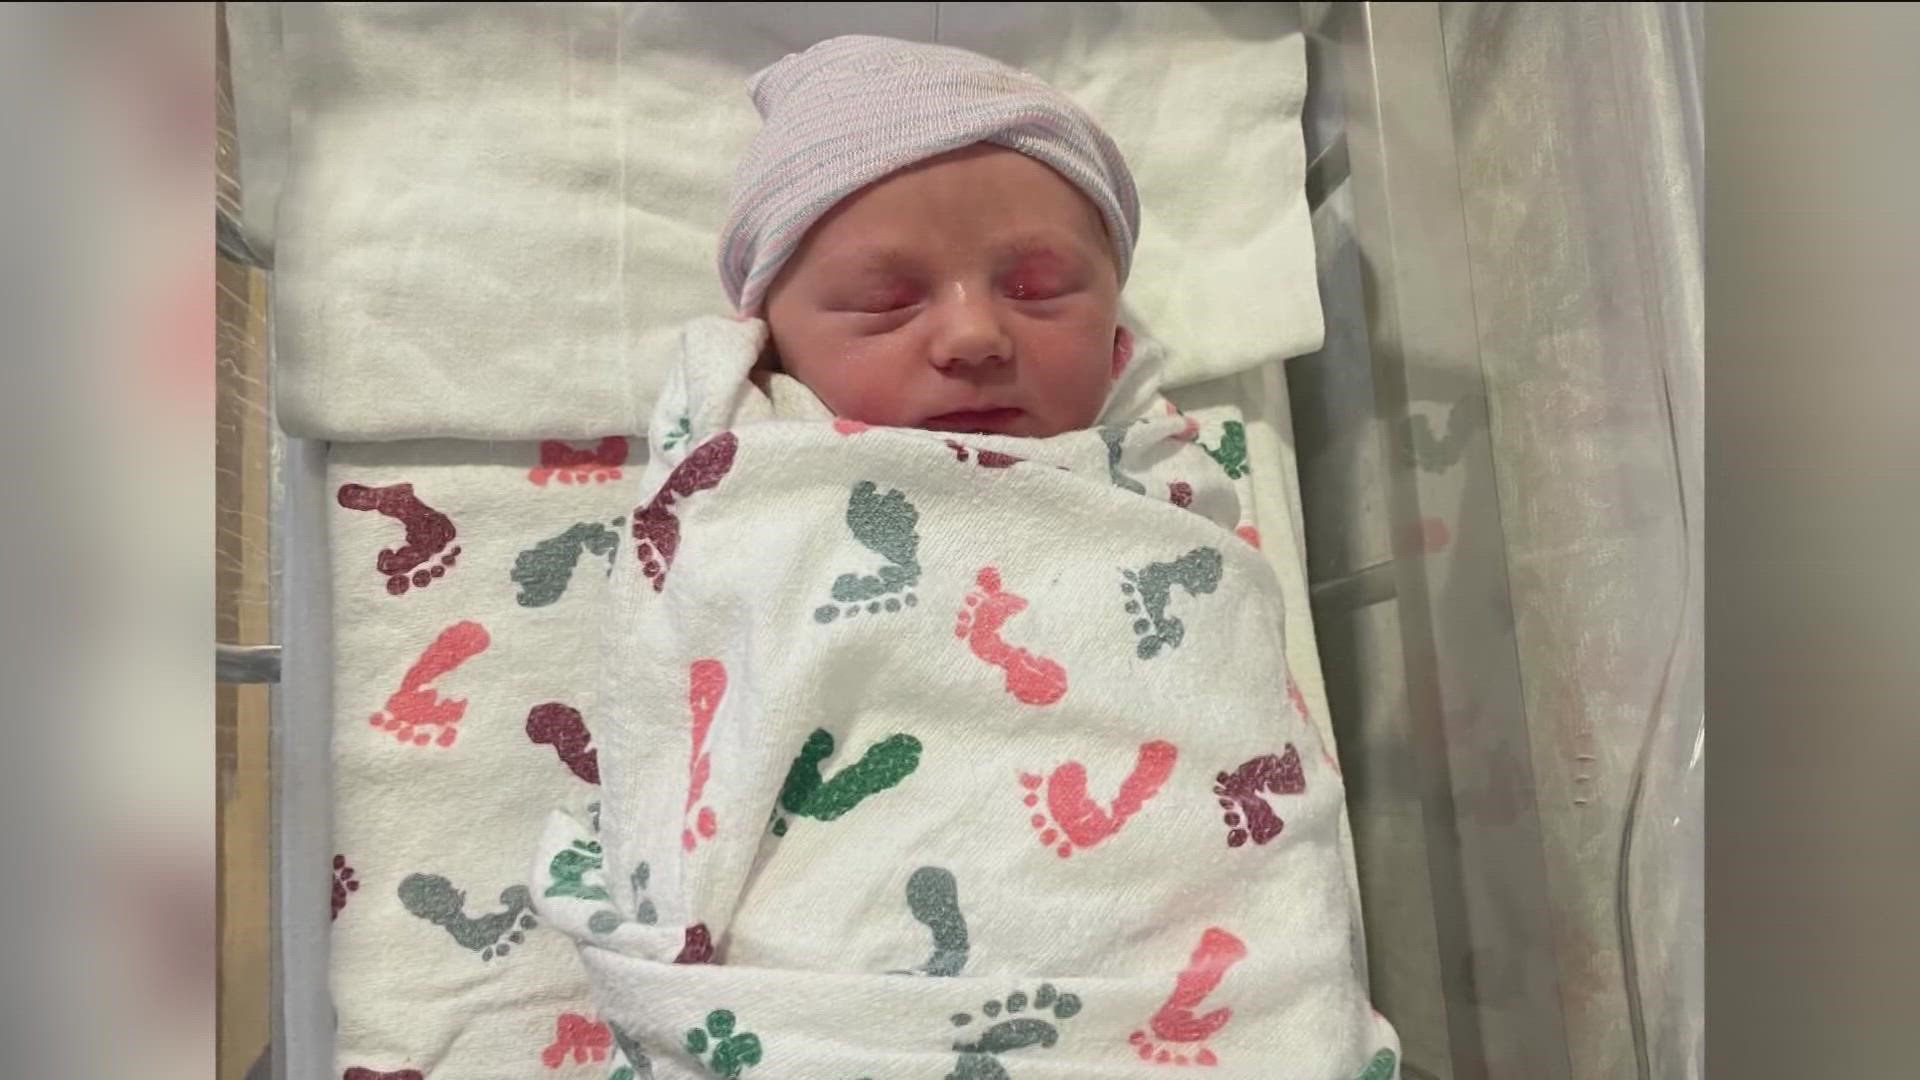 Mercy Health and Promedica Toledo welcomed the first newborns of 2023. Our Trent Croci spoke to one mother who is overjoyed by her New Year's gift.